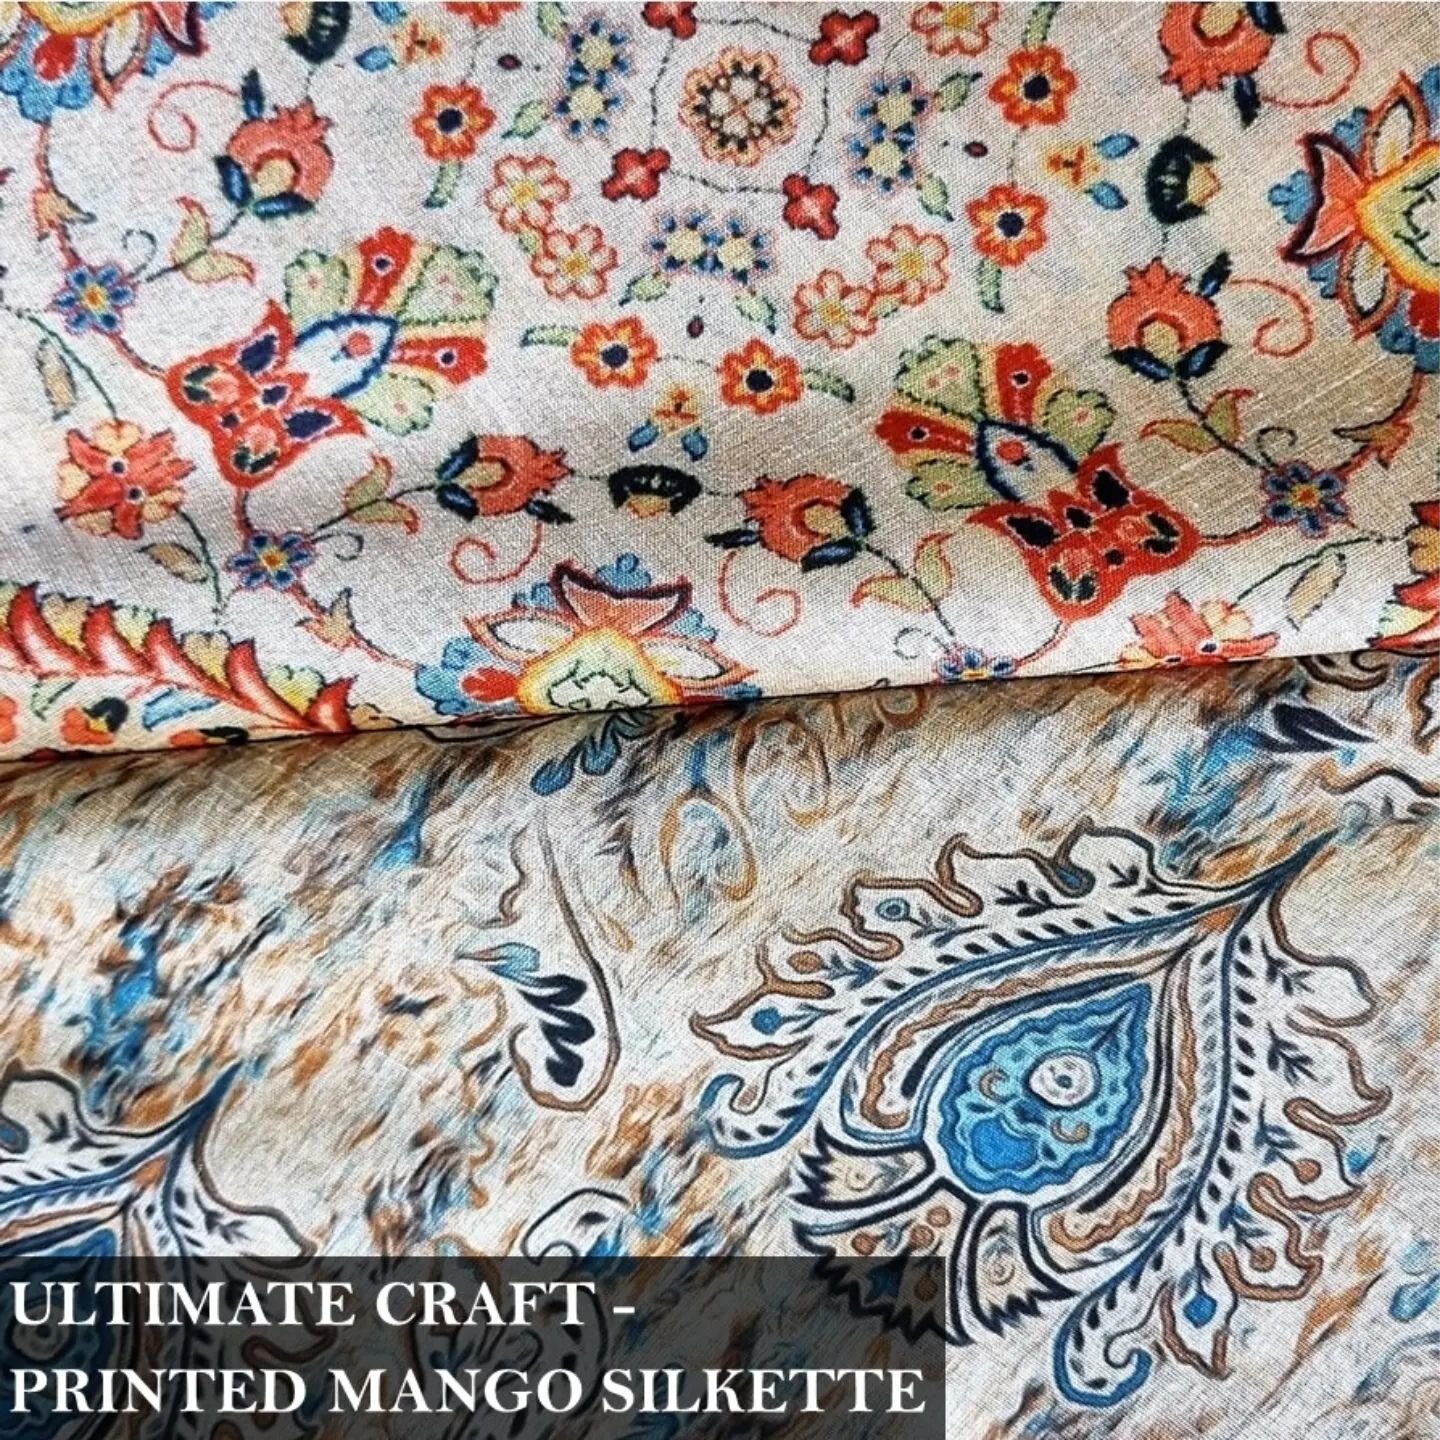 ULTIMATE CRAFT - Printed Mango Silkette.
A light and breathable silk blend with gorgeous printed designs.
14 styles available only at Ultimate Craft!
Shop online and in store:
www.ultimatecraft.co.uk
.
.
.
.
.
.
.
.
.
.
#fabric #fabricstore #silk #si